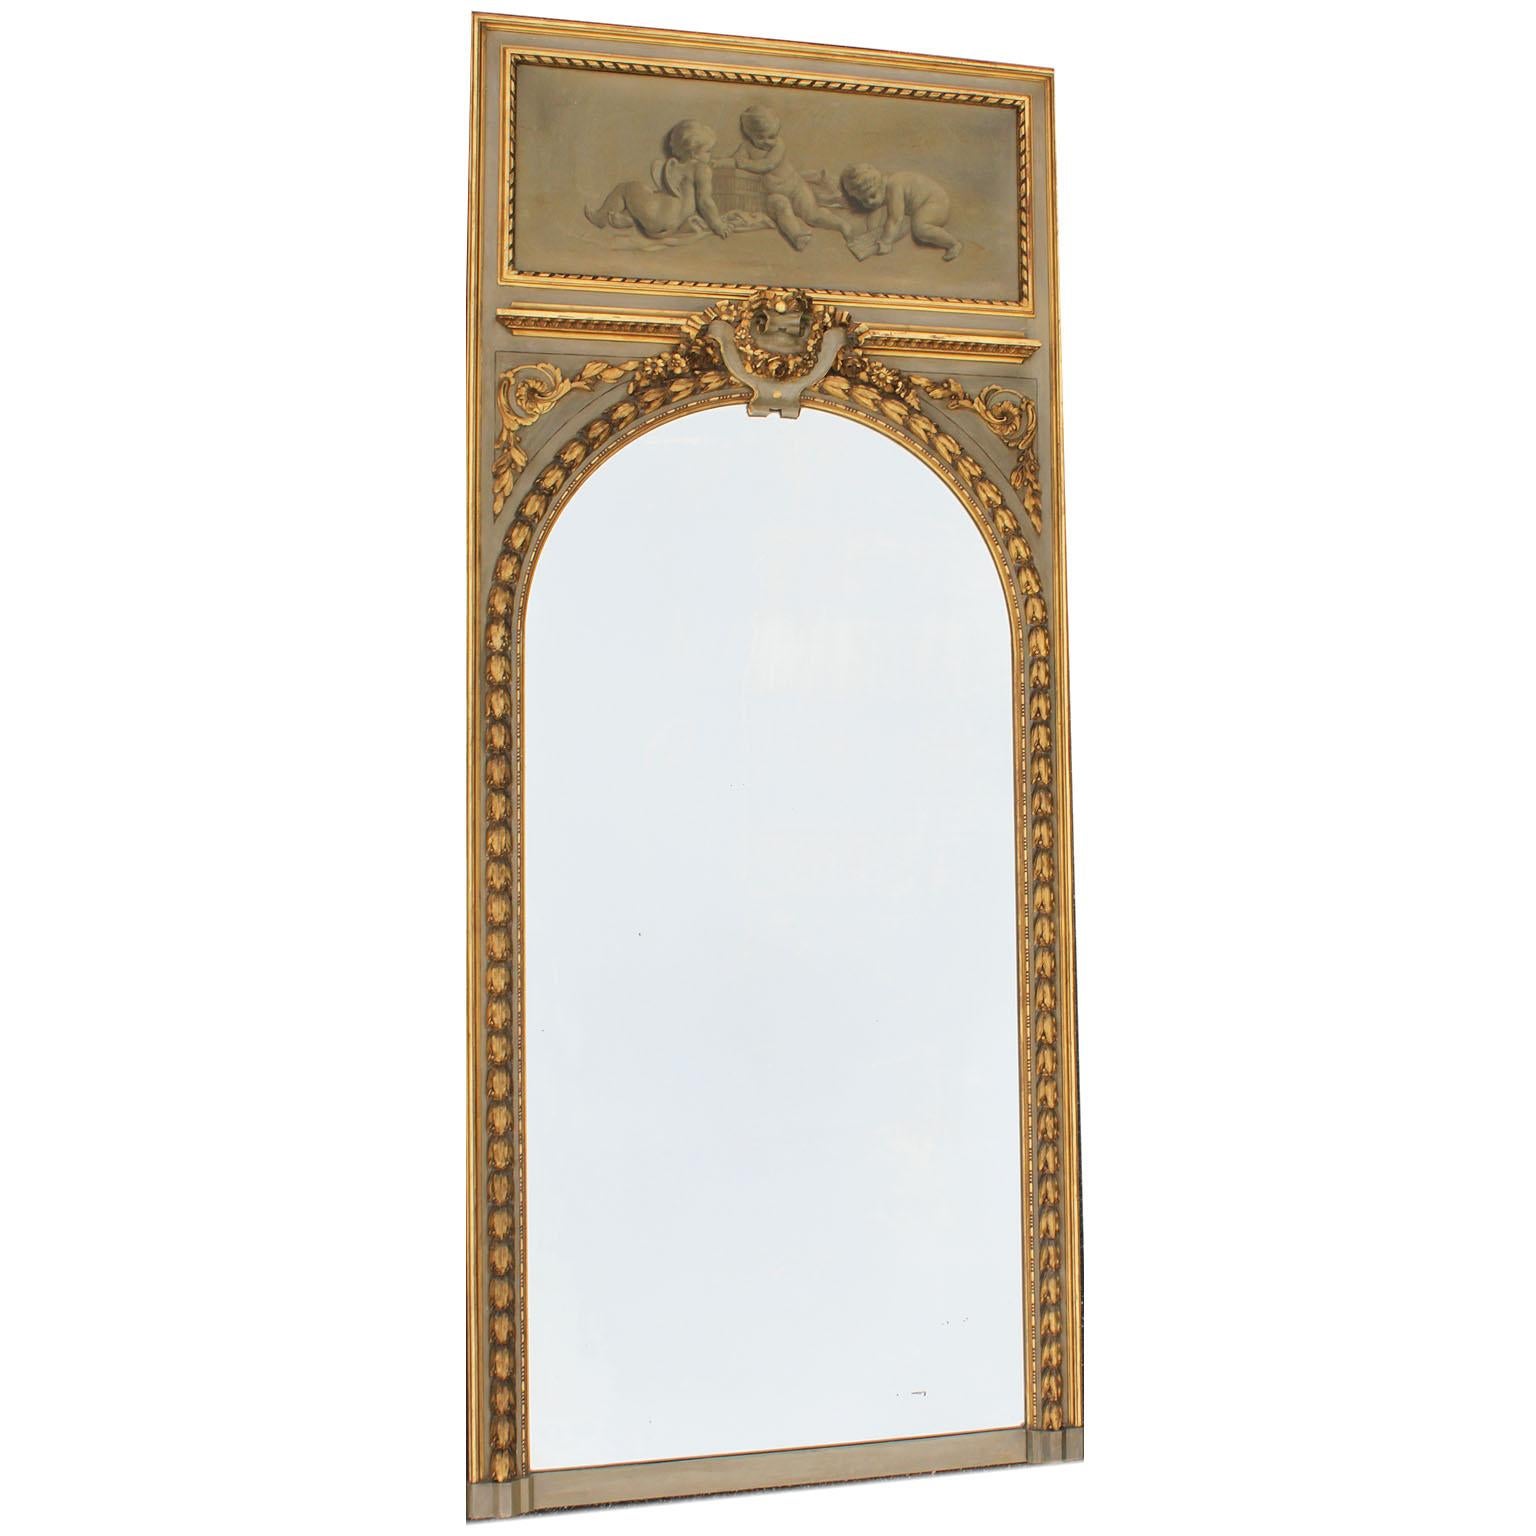 A fine pair of French 19th-20th century Louis XV style grey and parcel giltwood carved trumeau mirror frames. Each frame with an oil on canvas depicting allegorical playful Putti and cherubs with a cage, one playing a horn, both within a parcel-gilt